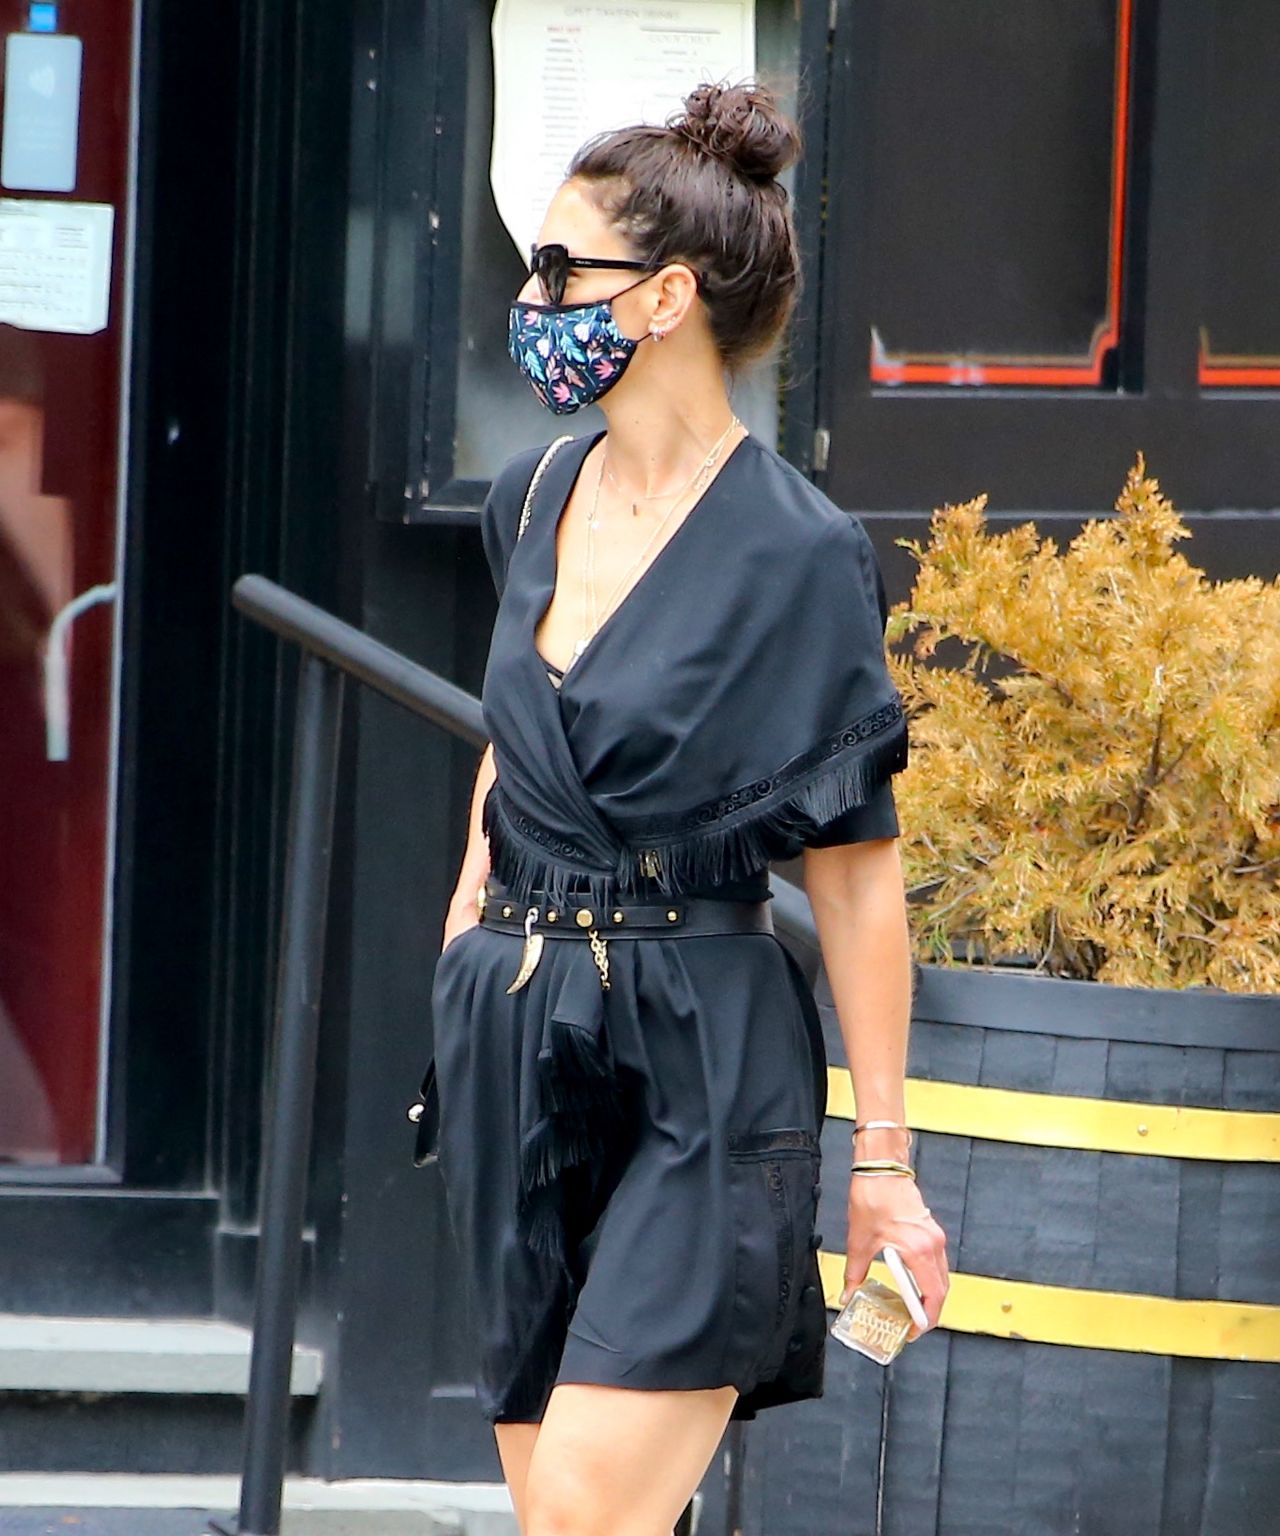 katie-holmes-with-face-mask-soho-in-new-york-07-15-2020-5.jpg